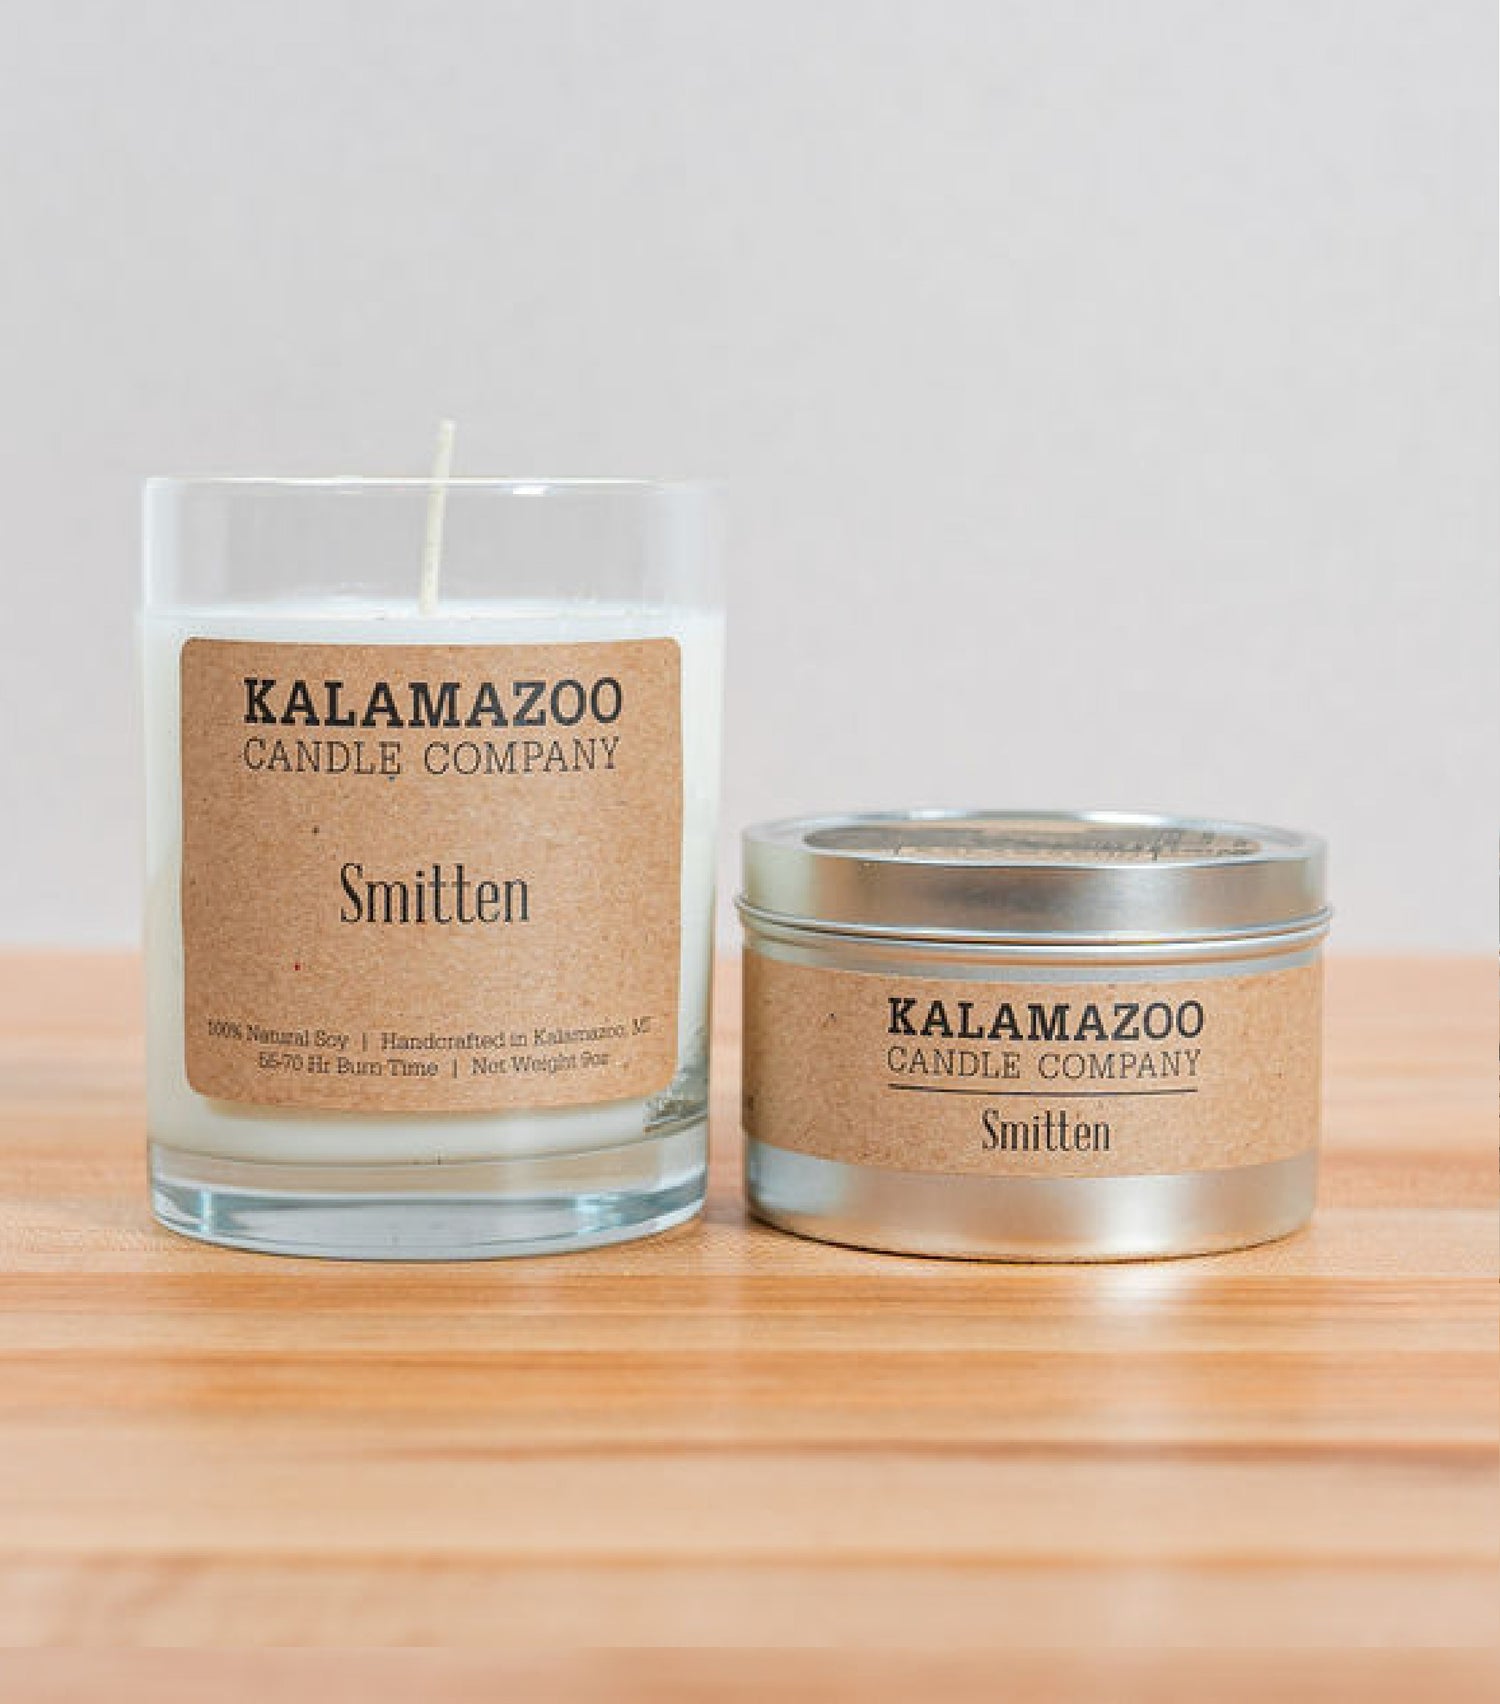 Smitten Candles A soft, sweet blend of floaty florls, sparkling citrus and creamy vanilla, this classic soy candle smells like sunshine daydreams. All Kalamazoo Candles are: 100% natural scented soy wax; produced using locally sourced and American-made ma